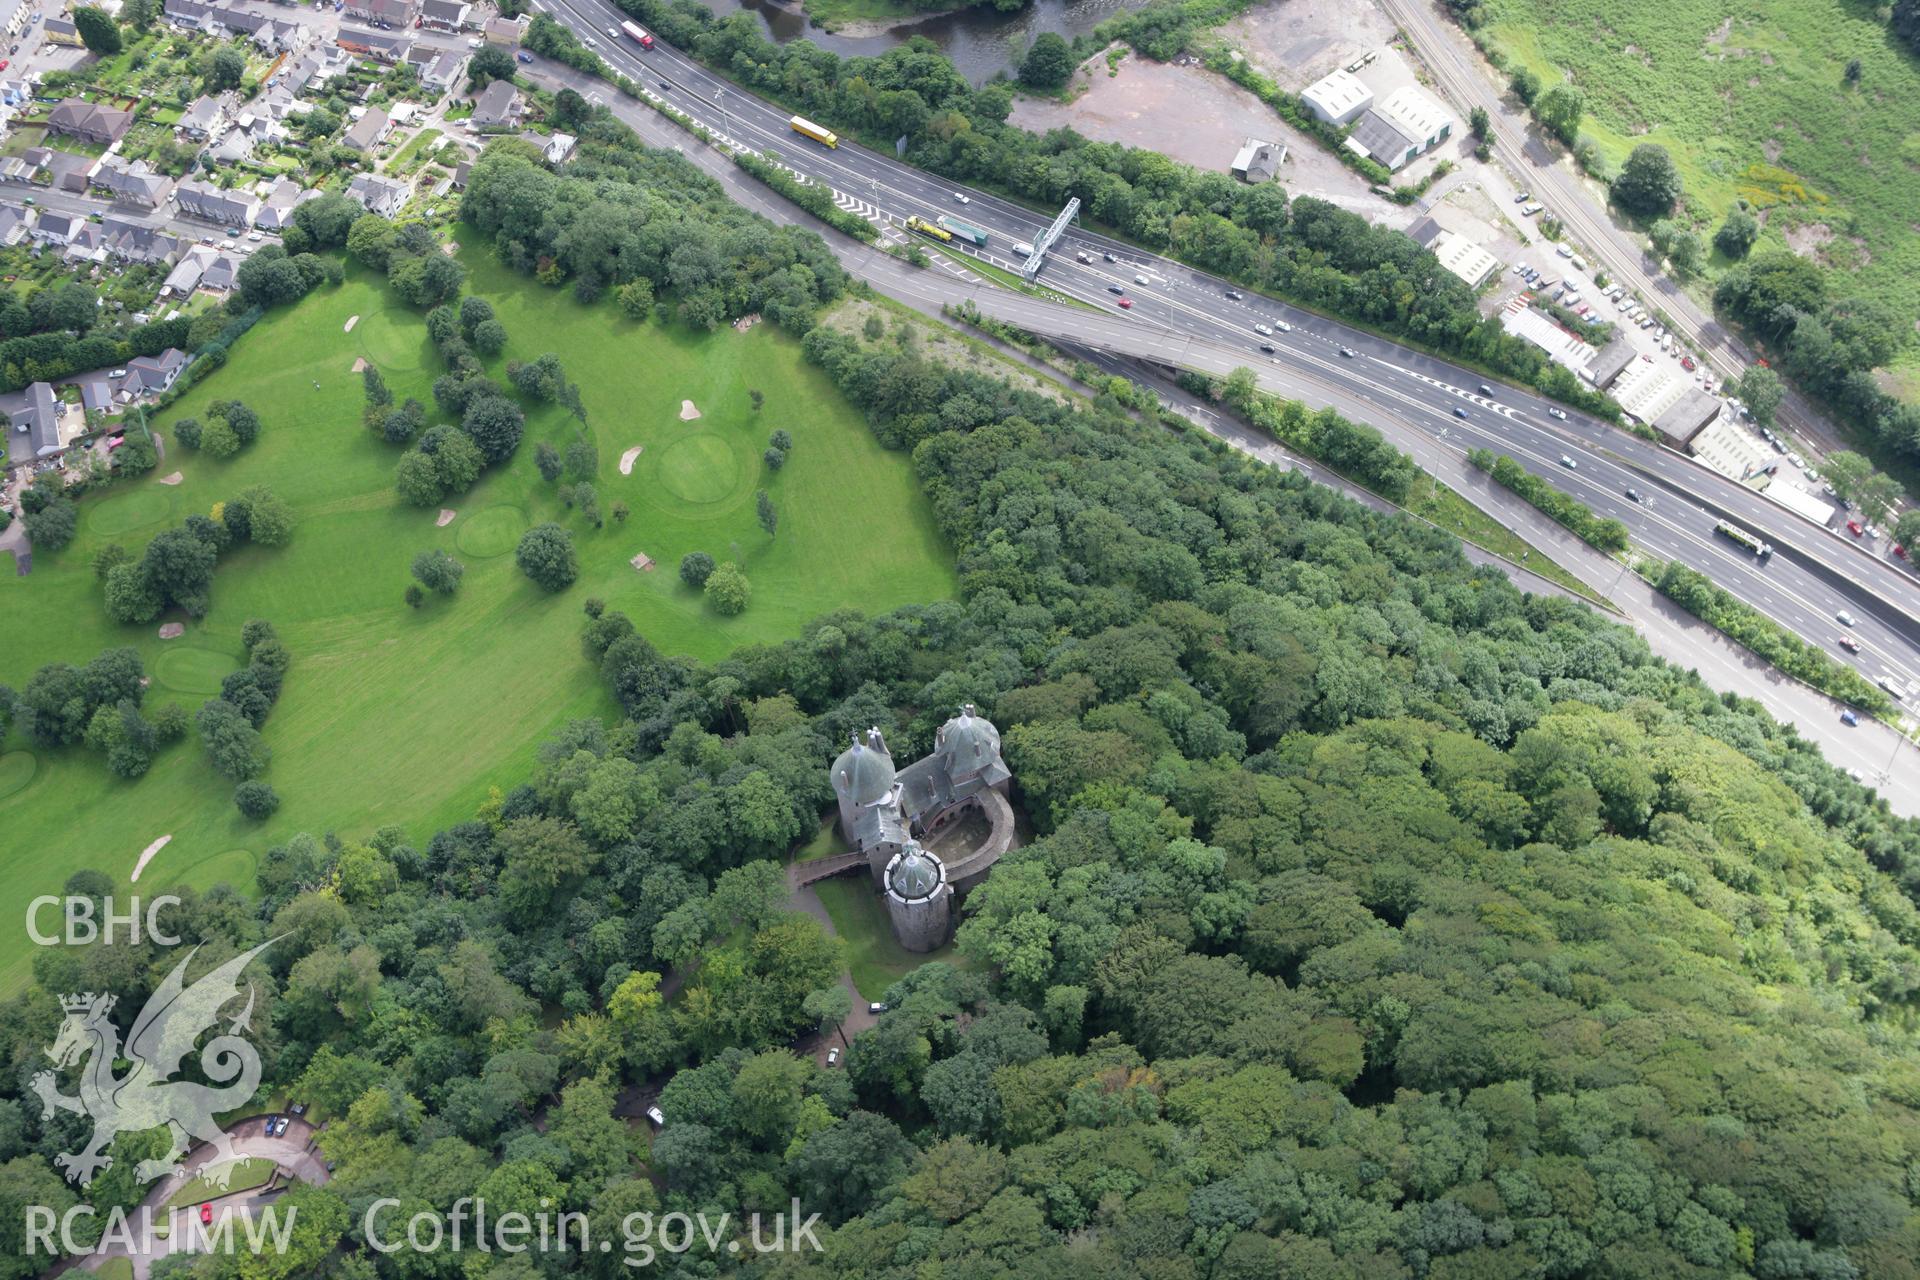 RCAHMW colour oblique aerial photograph of Castell Coch, Tongwynlais. Taken on 30 July 2007 by Toby Driver